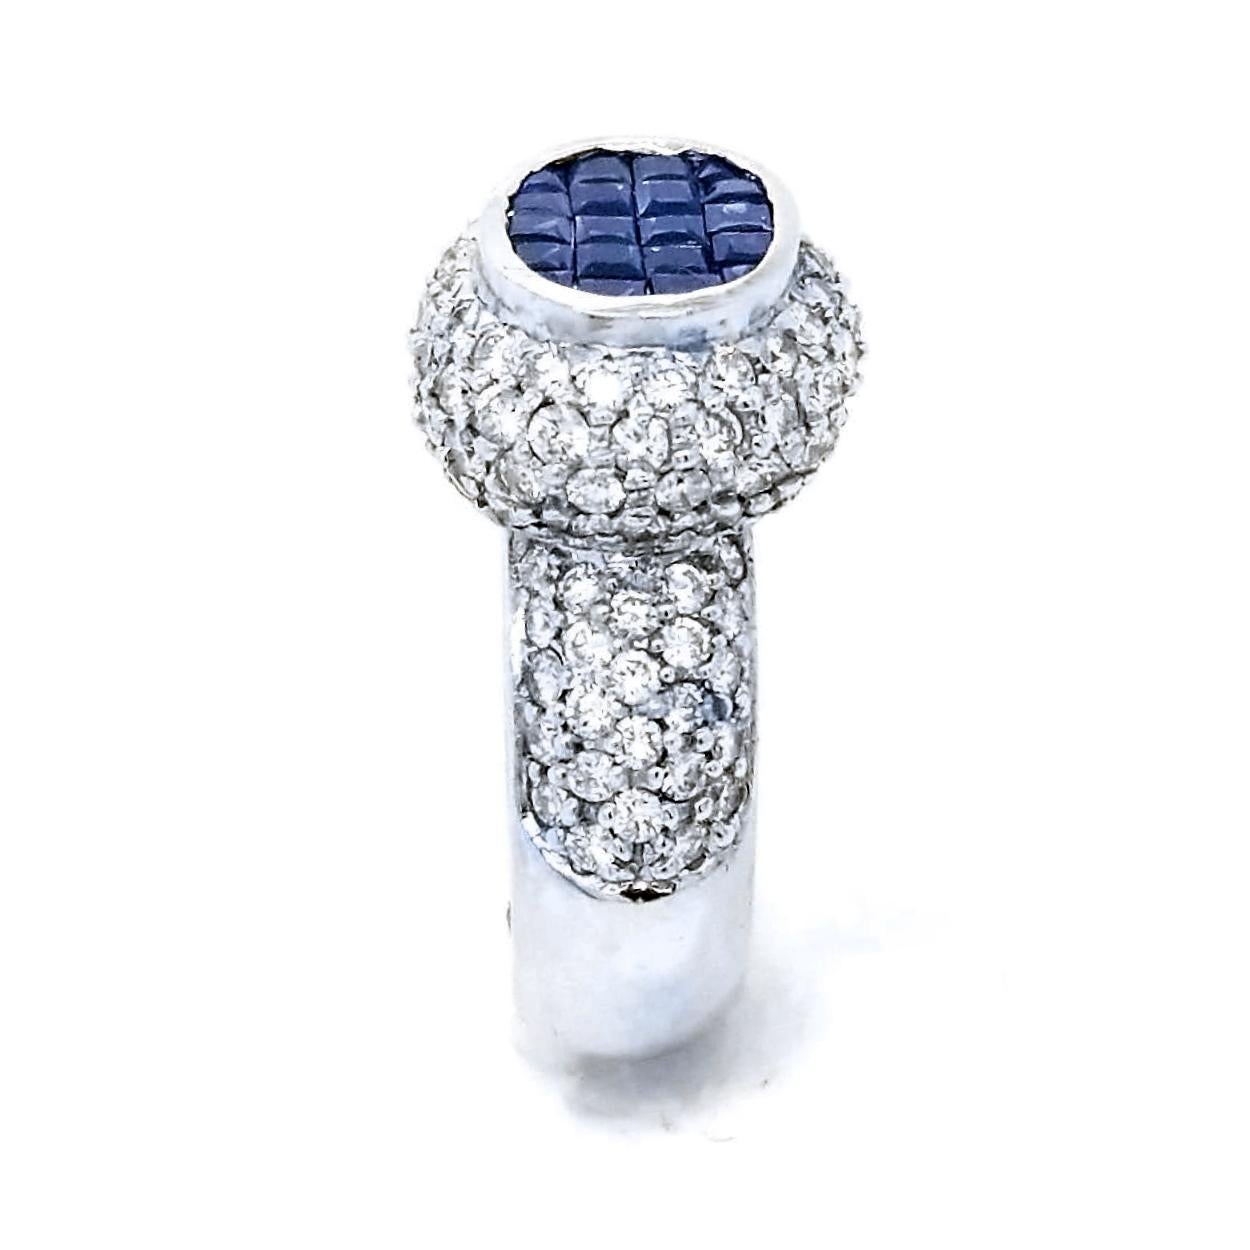 18K Gold Pave Set Diamond Ring with Oval Shaped Center comprised of  20 Invisible Set Princess Cut Blue Sapphires (Total Gem Weight 1.15 Ct) surrounded by 3 Rows of Pave Set Halo of diamonds and 5 Rows of Pave Set diamond on the shank with total